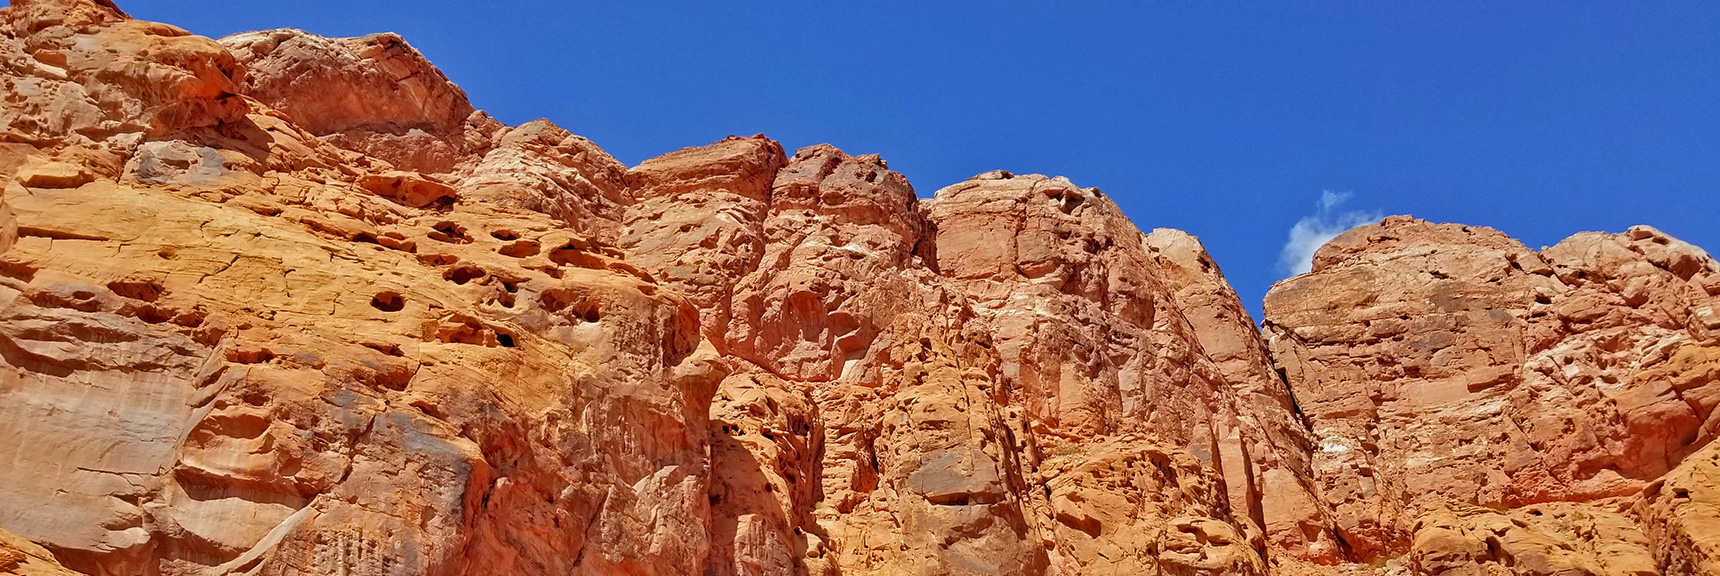 Countless Unique Designs in the Cliffs | Northern Bowl of Fire | Lake Mead National Recreation Area, Nevada